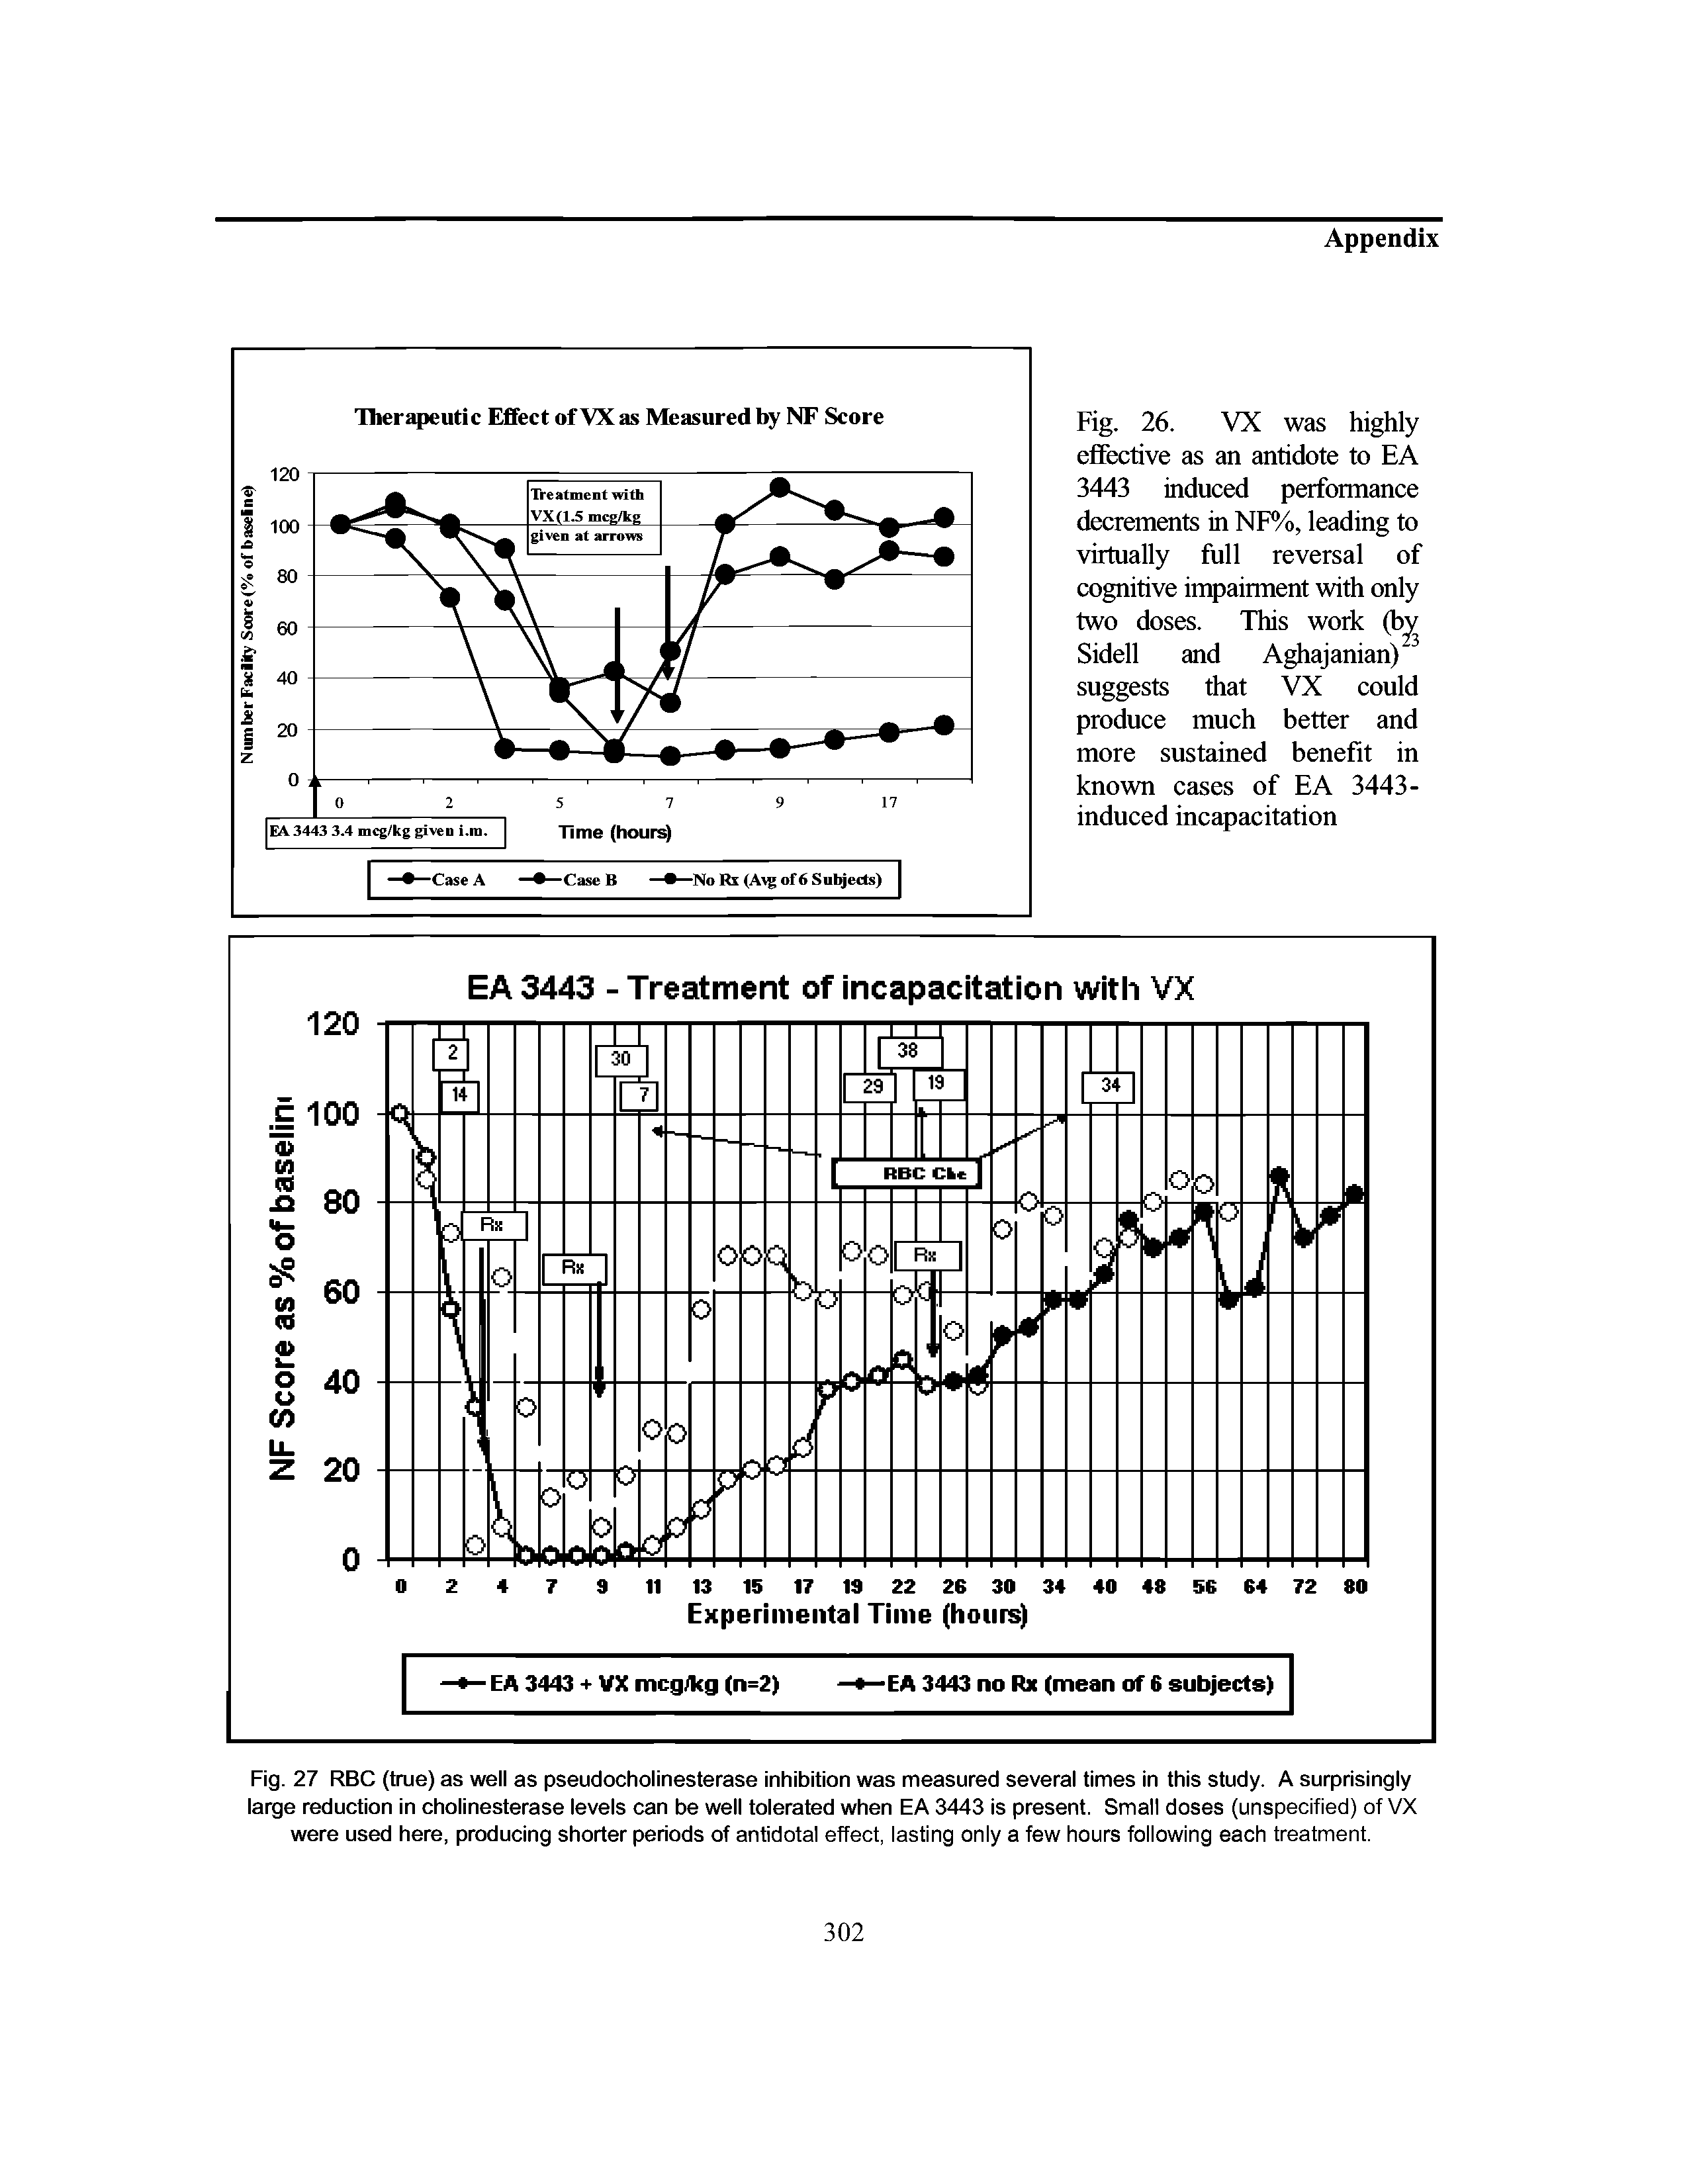 Fig. 27 RBC (tme) as well as pseudocholinesterase inhibition was measured several times in this study. A surprisingly large reduction in cholinesterase levels can be well tolerated when EA 3443 is present. Small doses (unspecified) of VX were used here, producing shorter periods of antidotal effect, lasting only a few hours following each treatment.